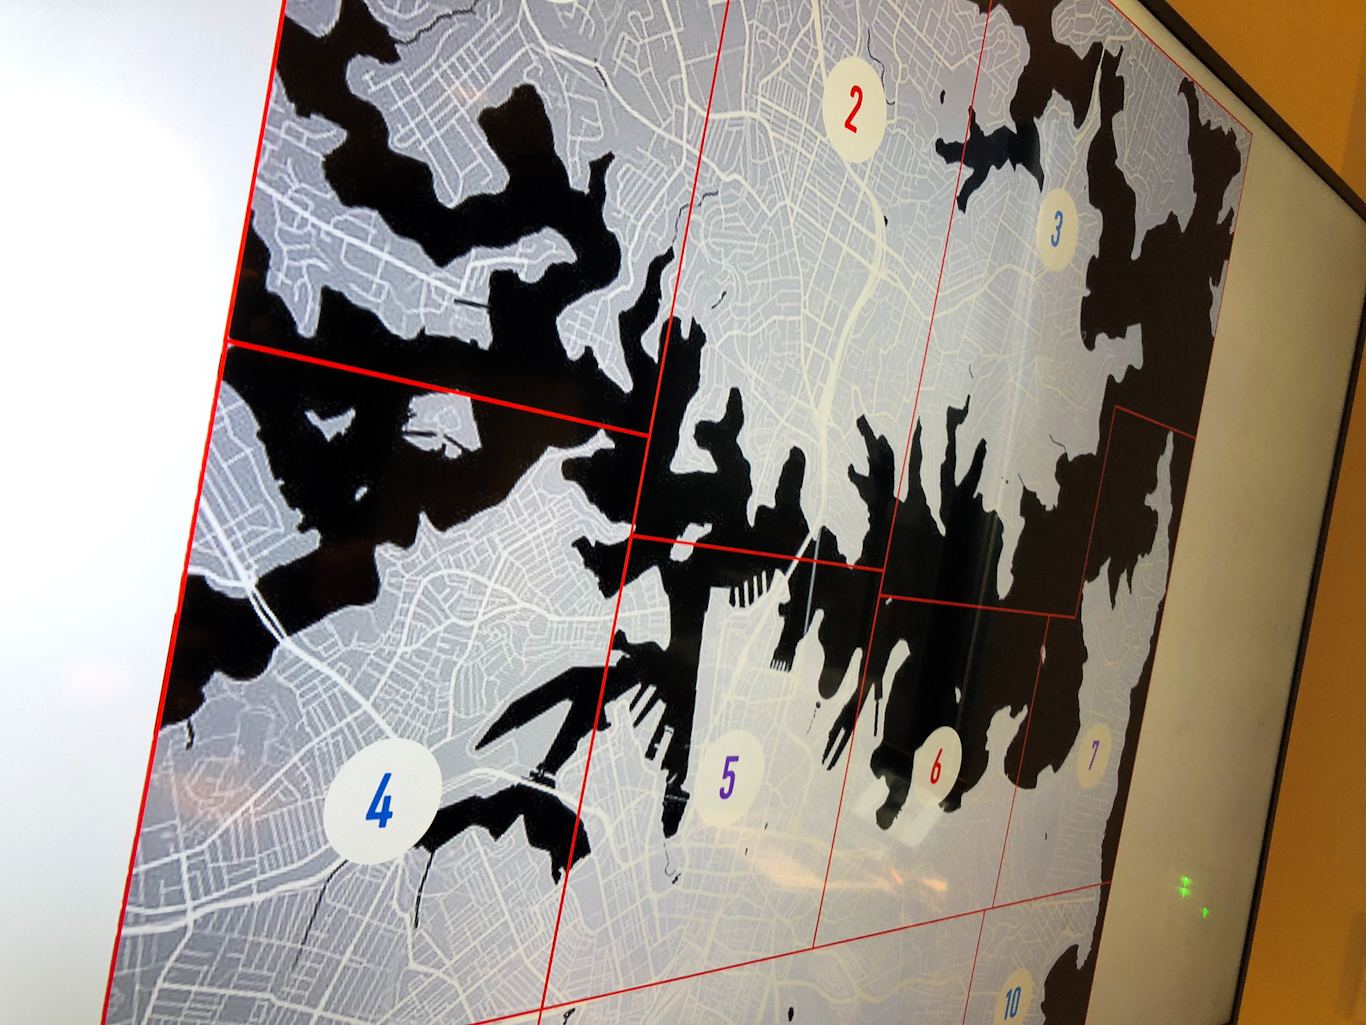 A map of targets in Adverseria is shown during Operation Blackout in Boston’s John Hancock Tower. Mark Albert | Twitter